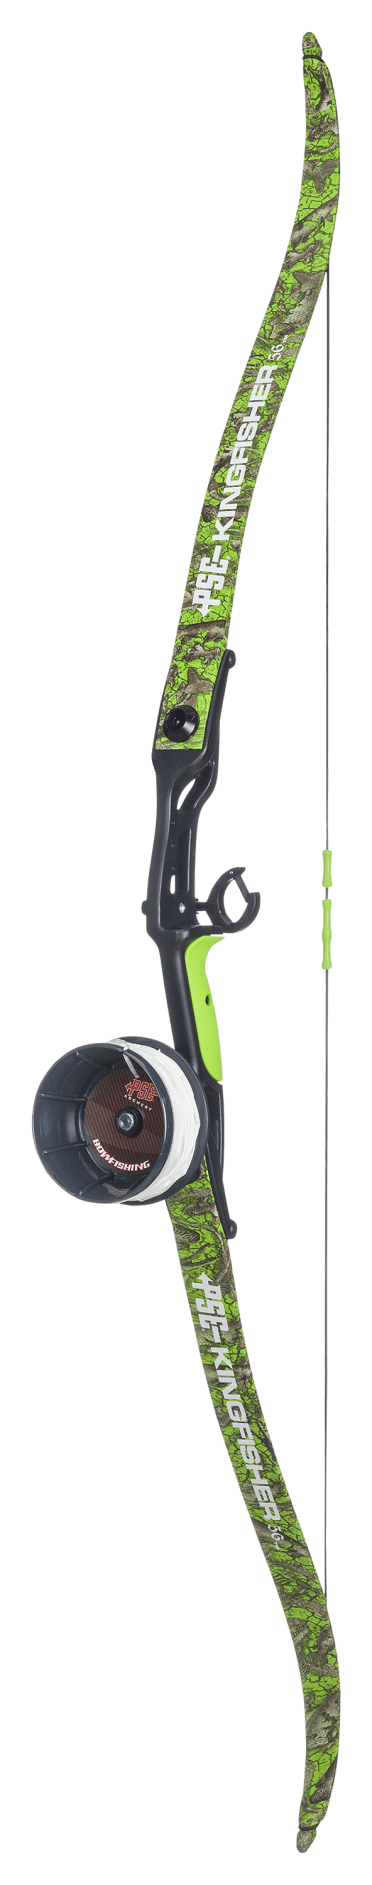 PSE Archery Kingfisher Bowfishing Recurve Bow Package